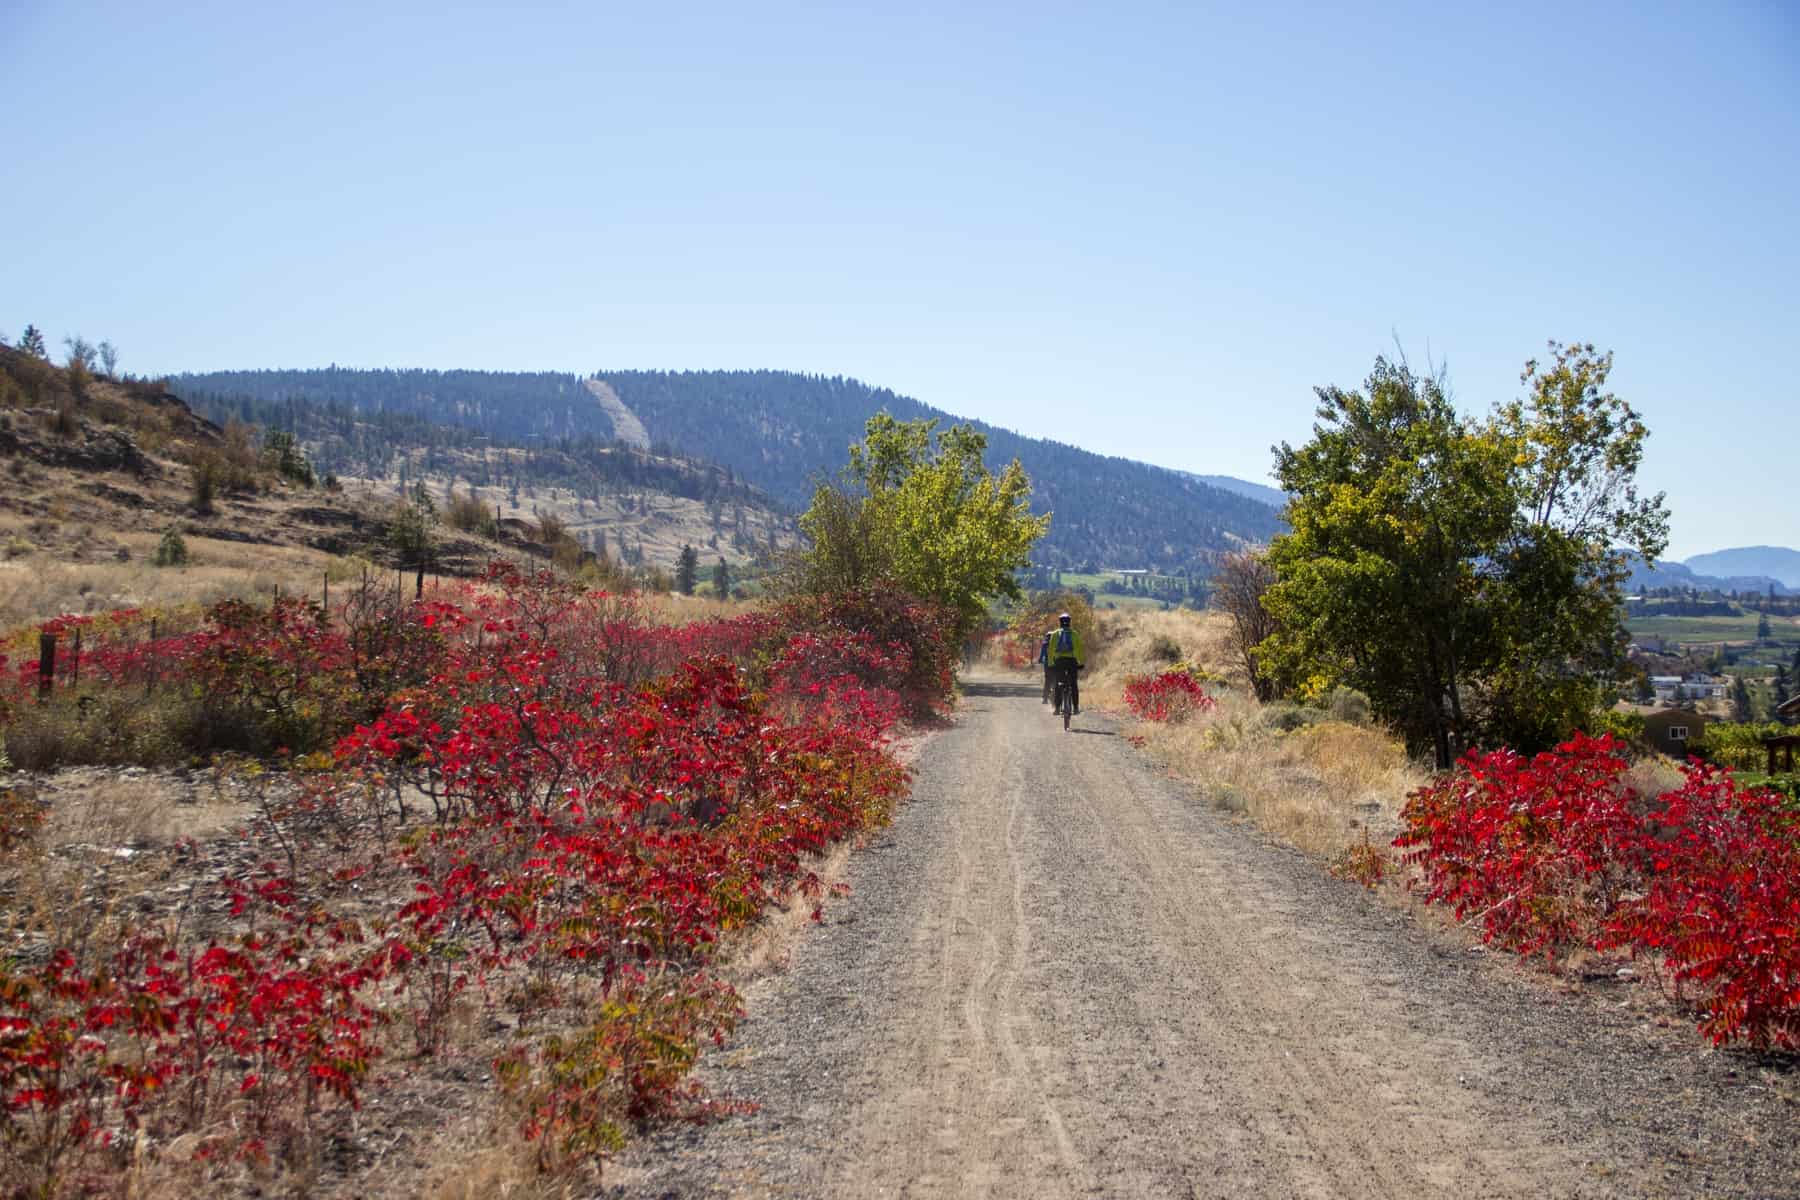 Cyclists on a gravel road lined with trees and red flowers, biking the Kettle Valley Railway route.